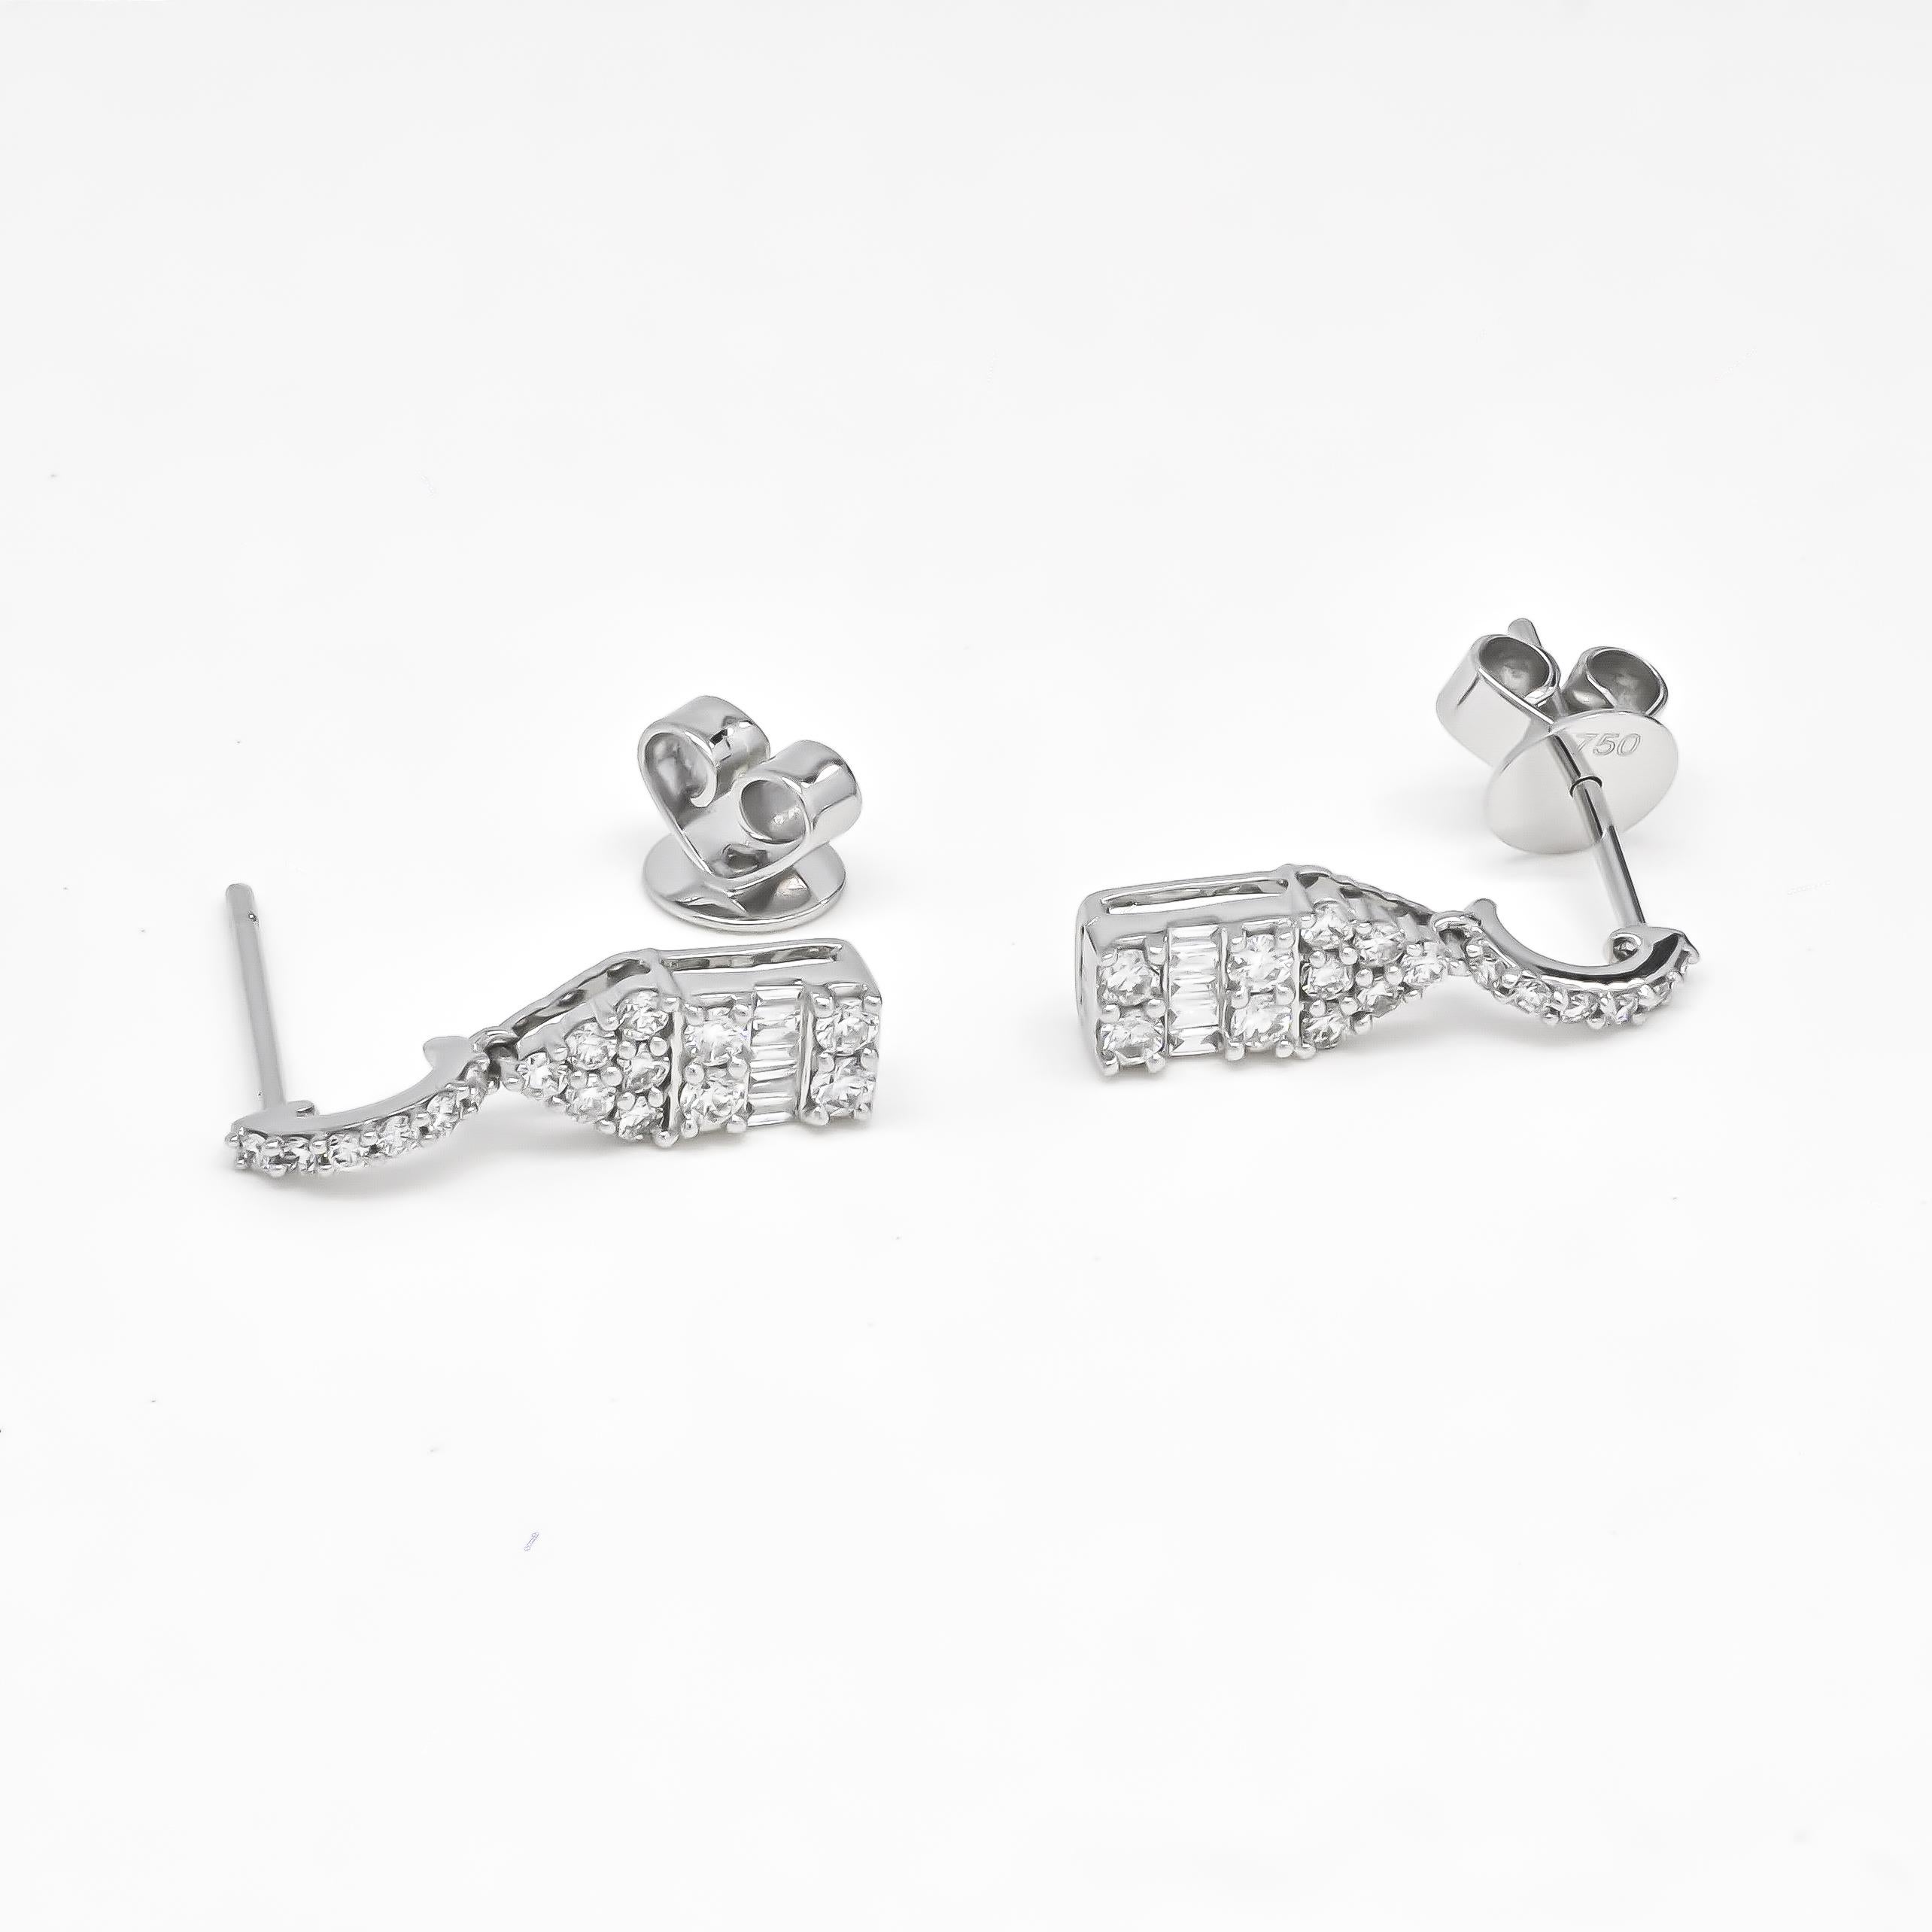 Minimalistic diamond 18KT white gold drop danglers earrings are the perfect accessory for young women who want to make a statement at a party. These earrings feature a simple yet elegant design that complements any outfit and adds a touch of